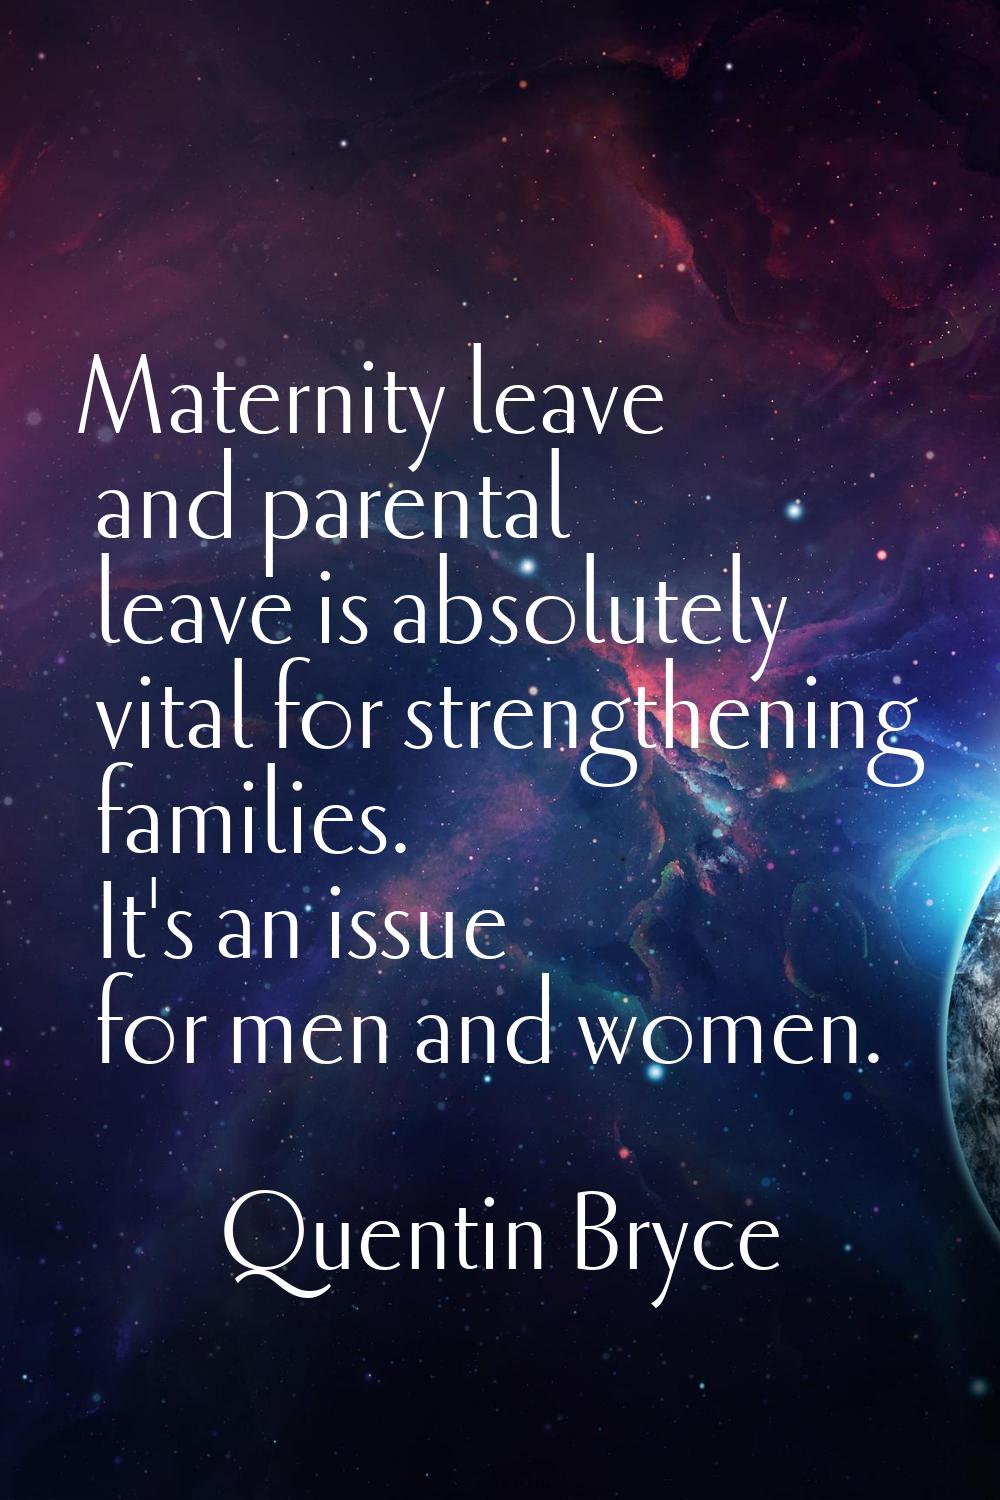 Maternity leave and parental leave is absolutely vital for strengthening families. It's an issue fo